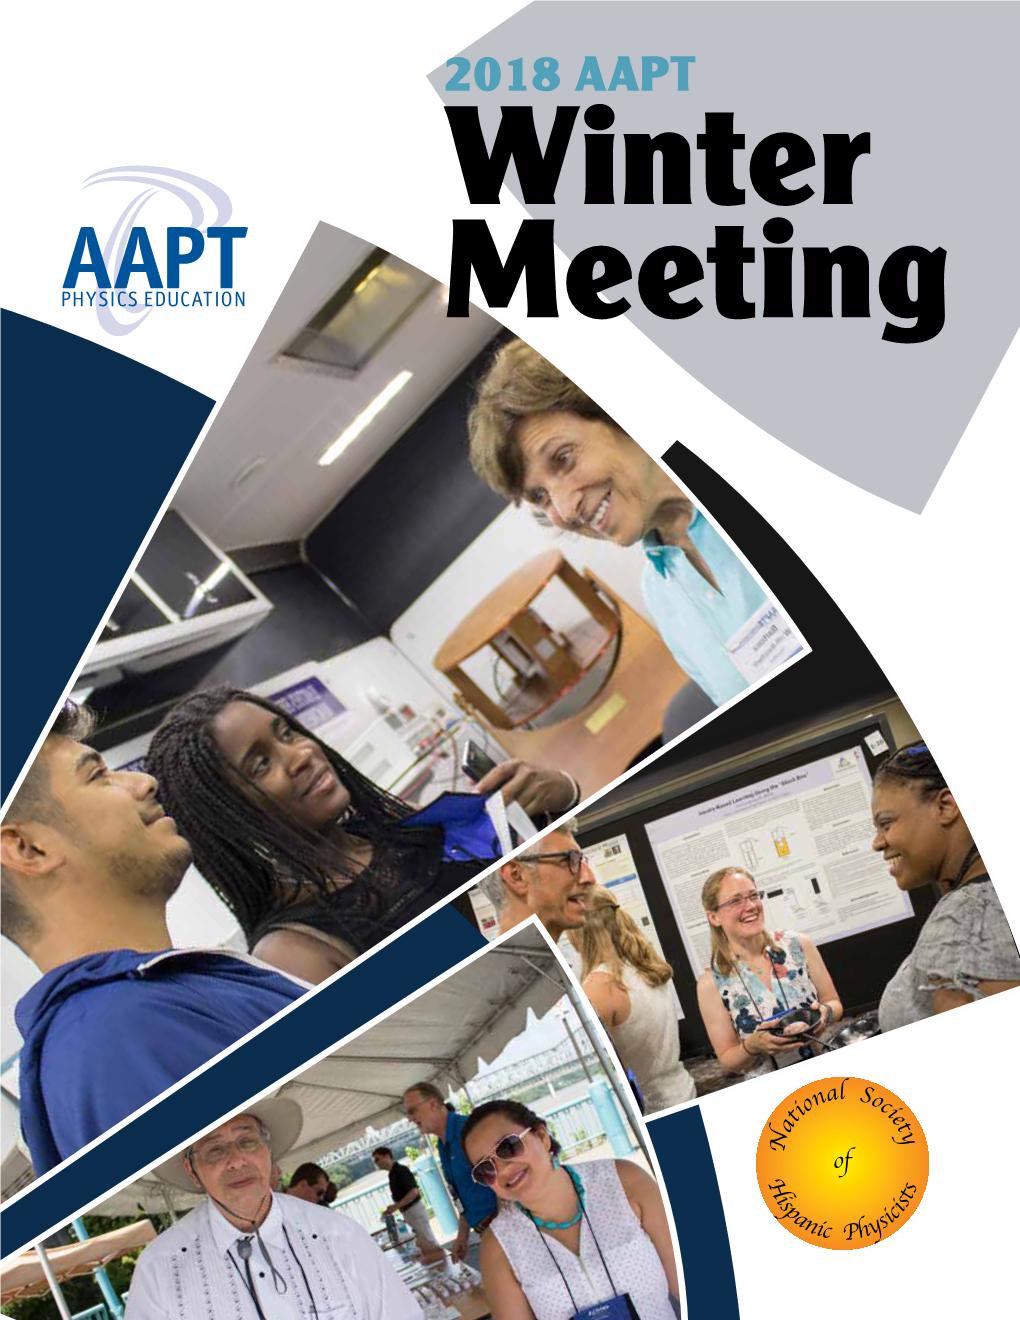 2018 AAPT Winter Meeting AD for EXPERT TA 2018 AAPT Winter Meeting San Diego, CA January 6-9